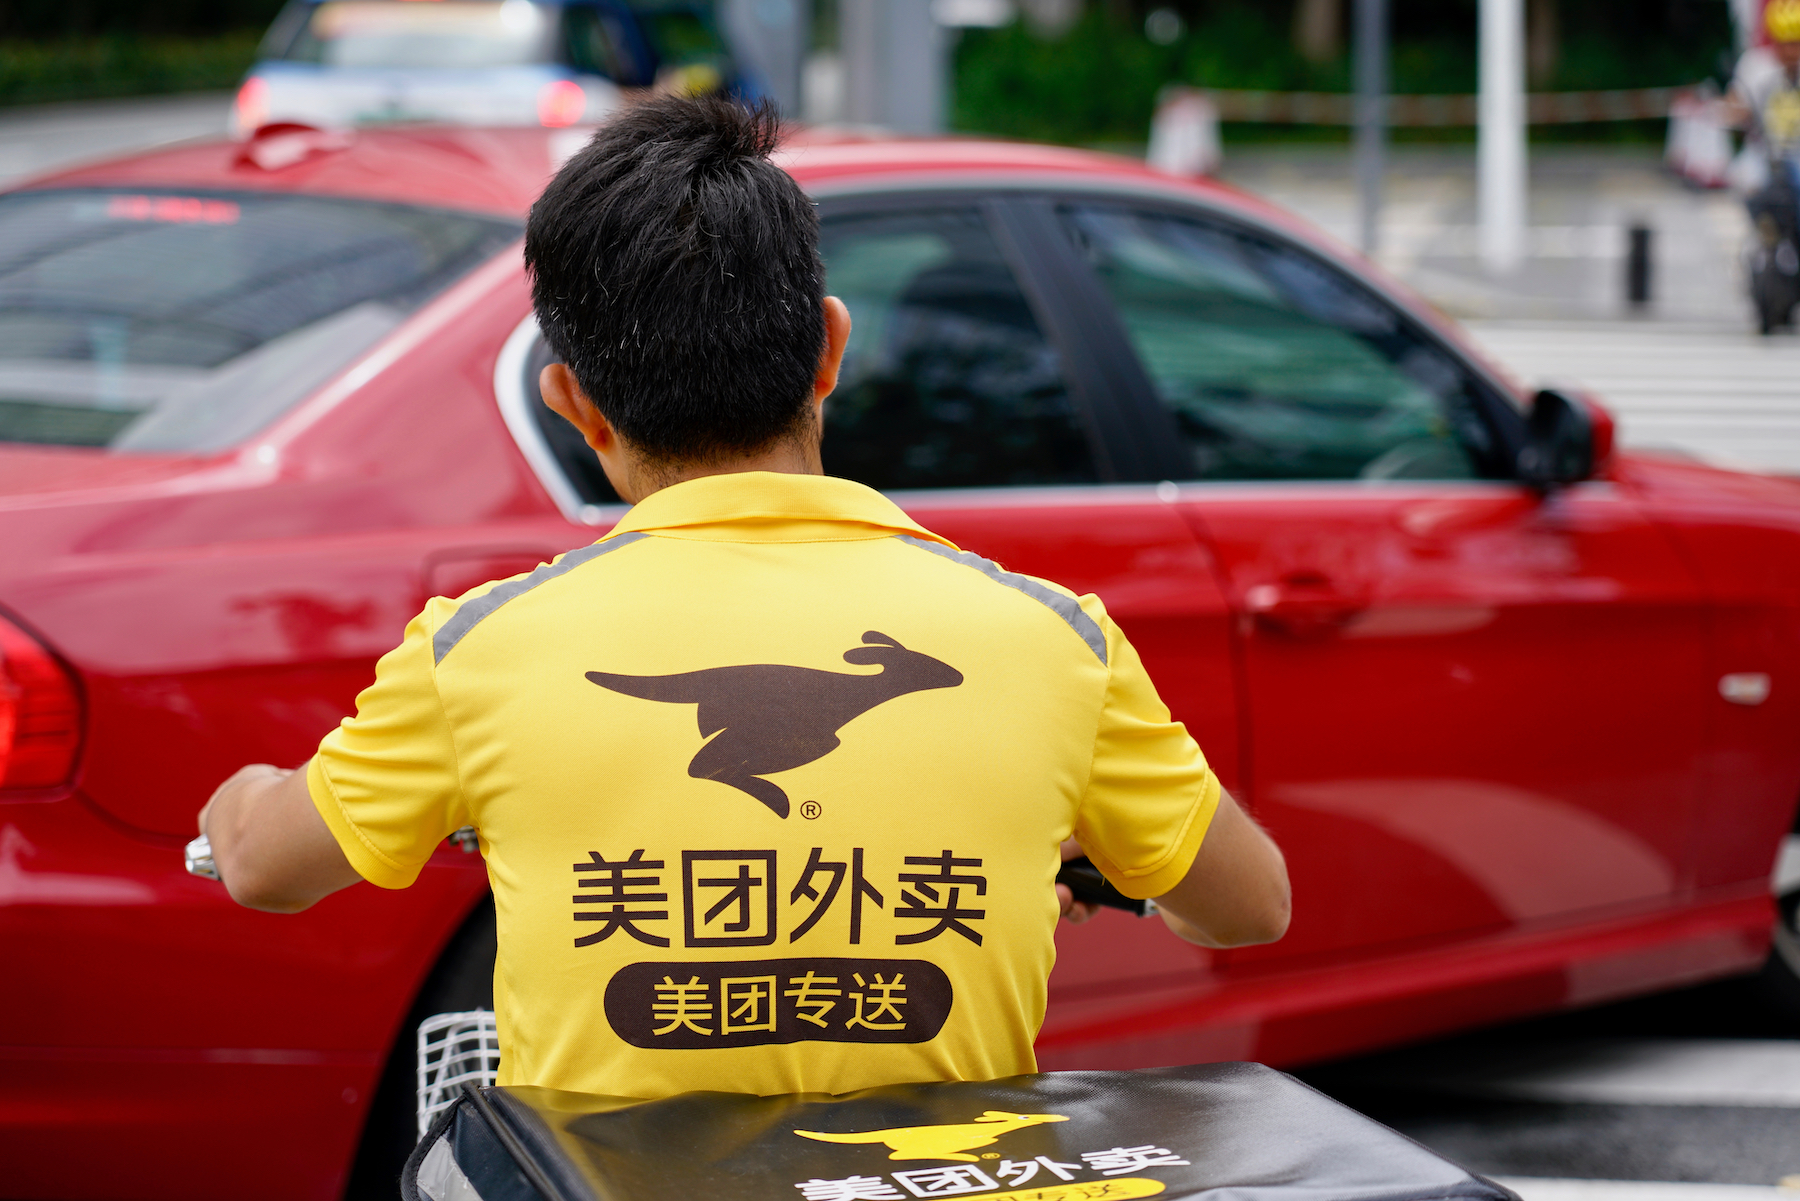 A Meituan food delivery rider drives in traffic behind a red car